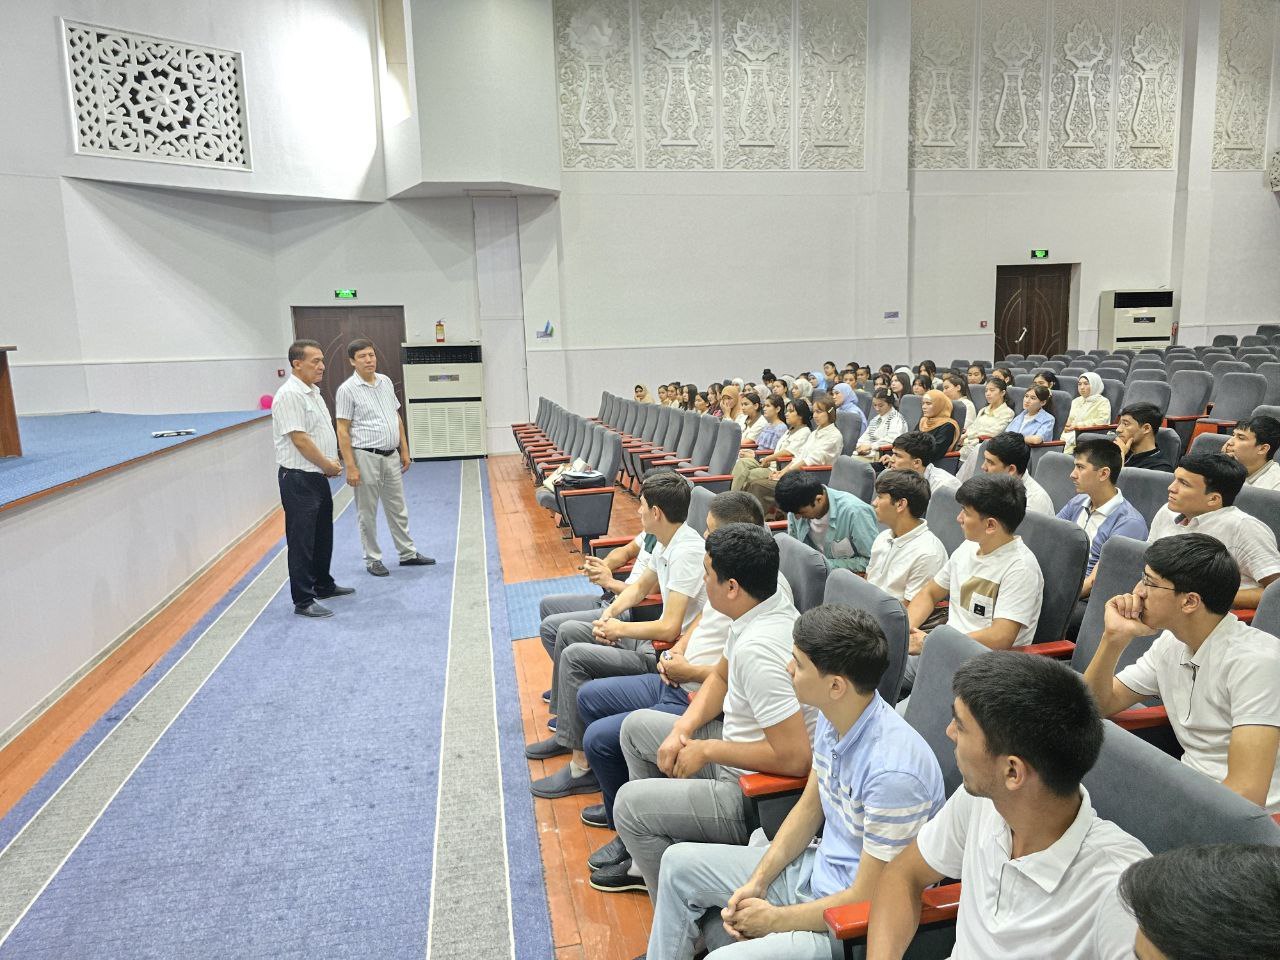 A MEETING WAS HELD WITH STUDENTS ON PRACTICAL TRAINING  AND GRADUATES